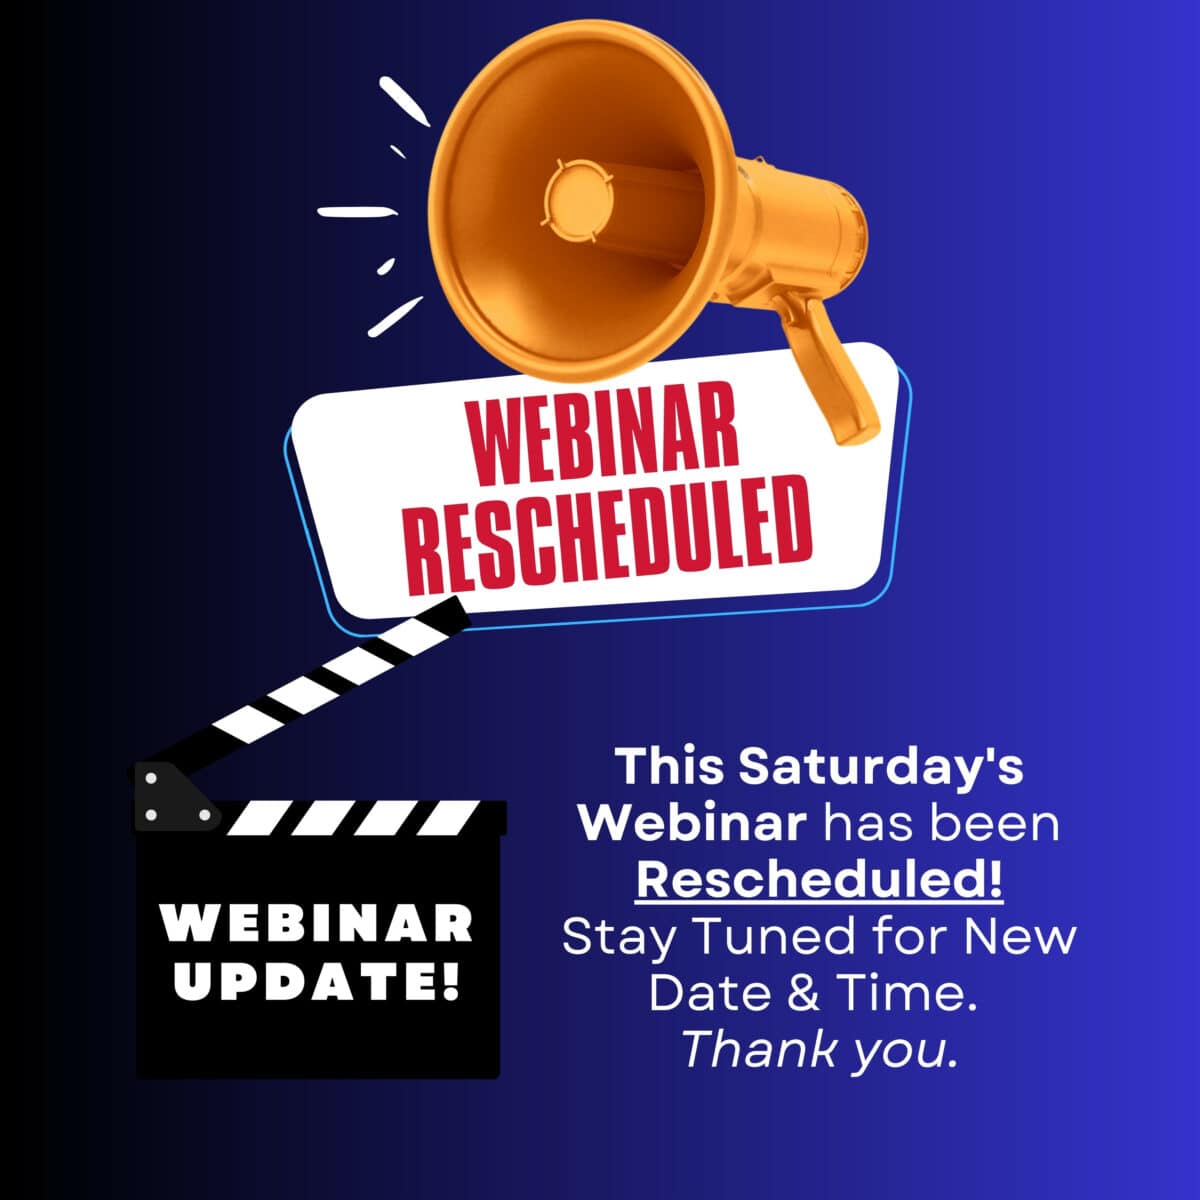 Webinar Update | This Saturday's Webinar has been Rescheduled. Stay Tuned for New Date & Time.